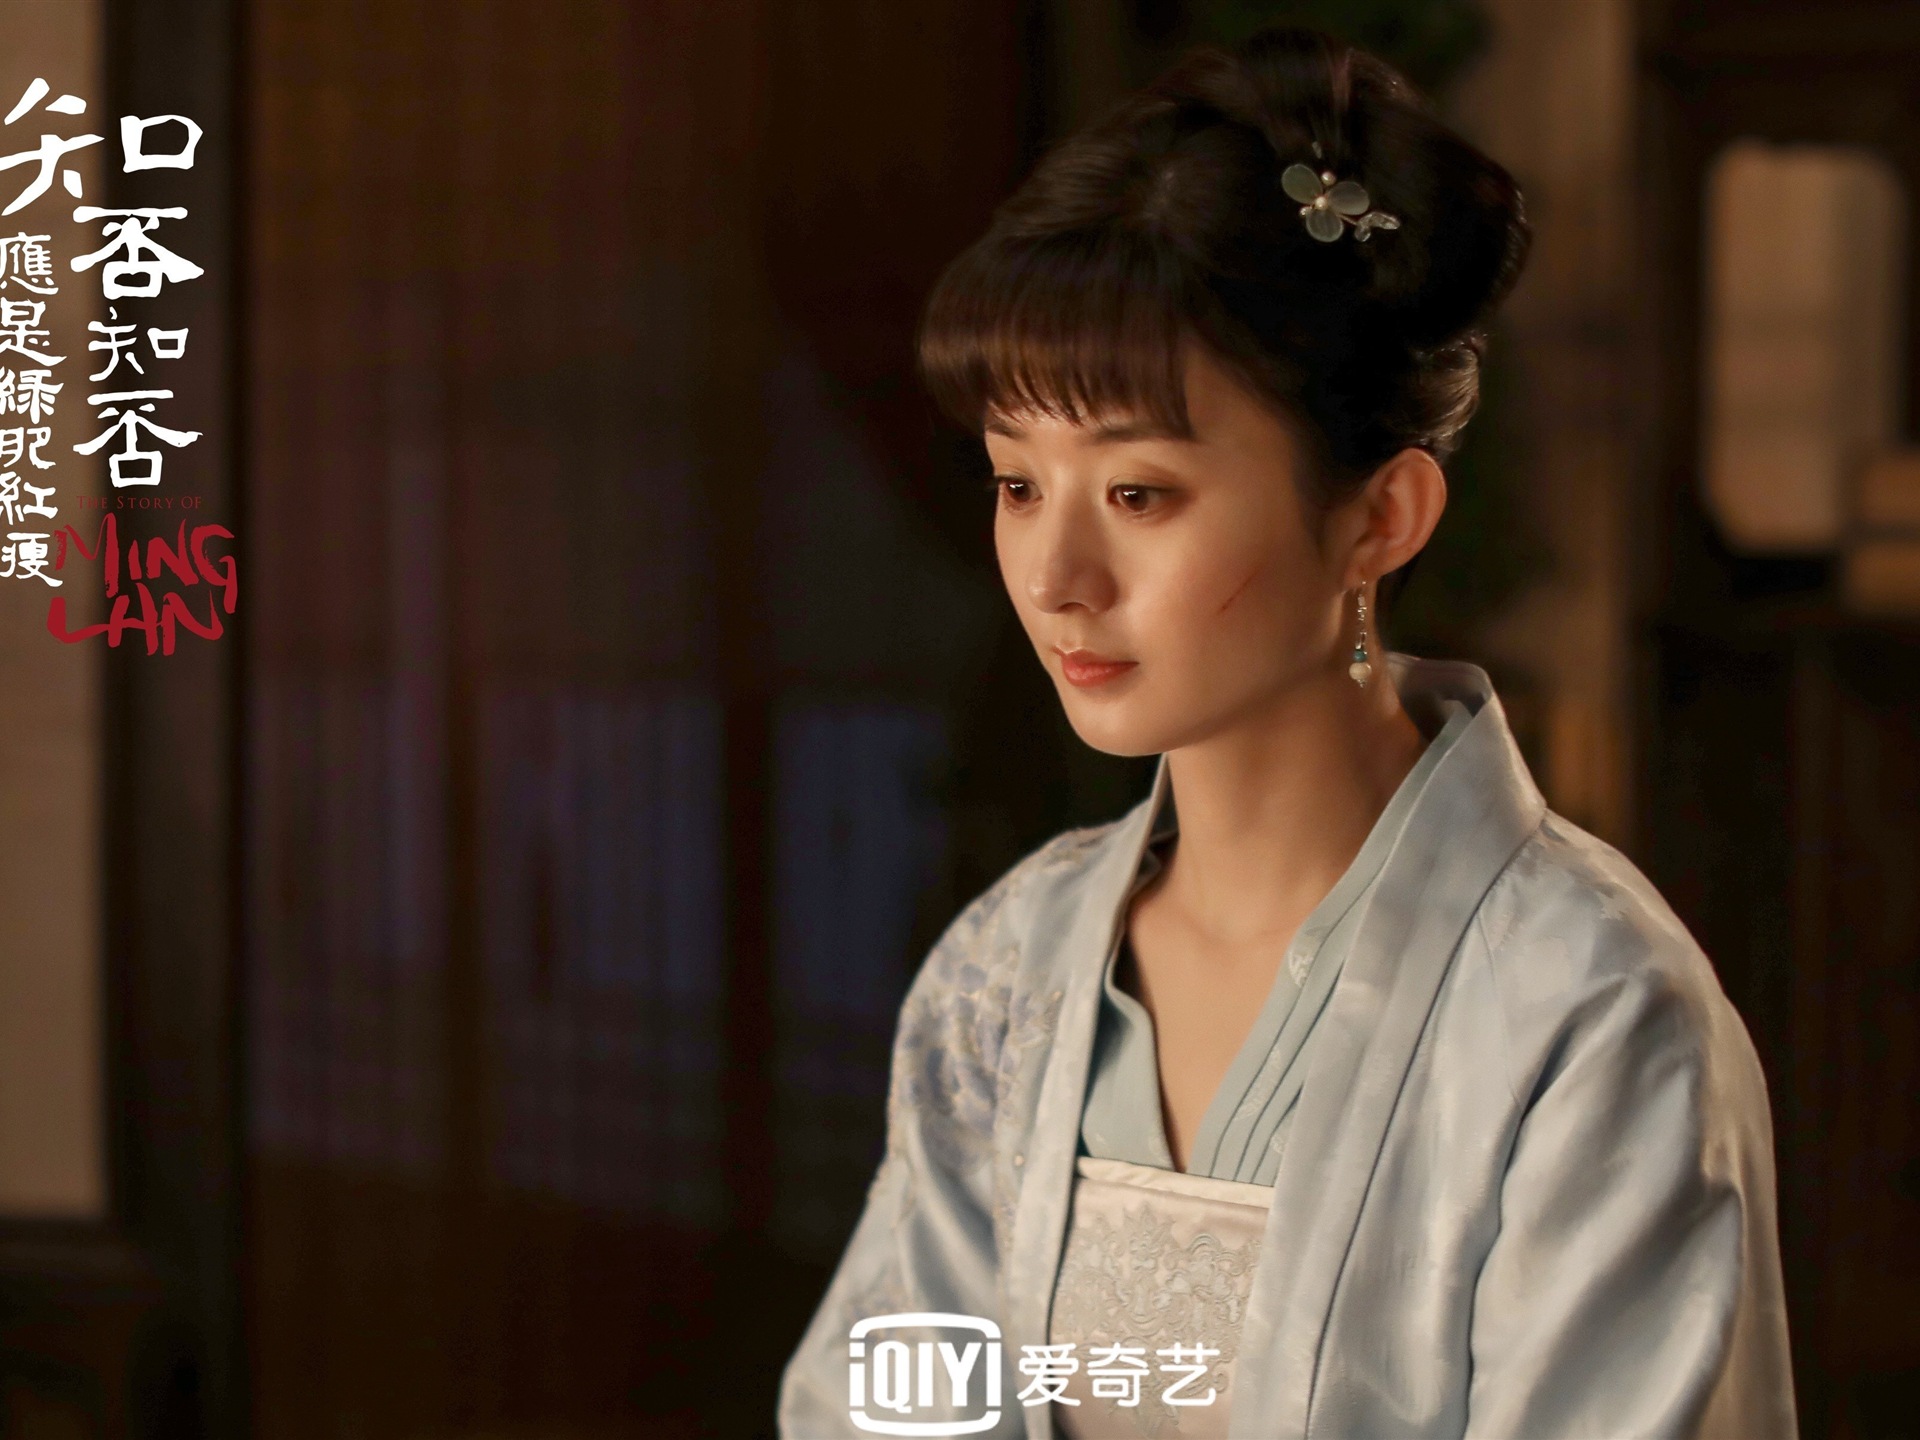 The Story Of MingLan, TV series HD wallpapers #36 - 1920x1440